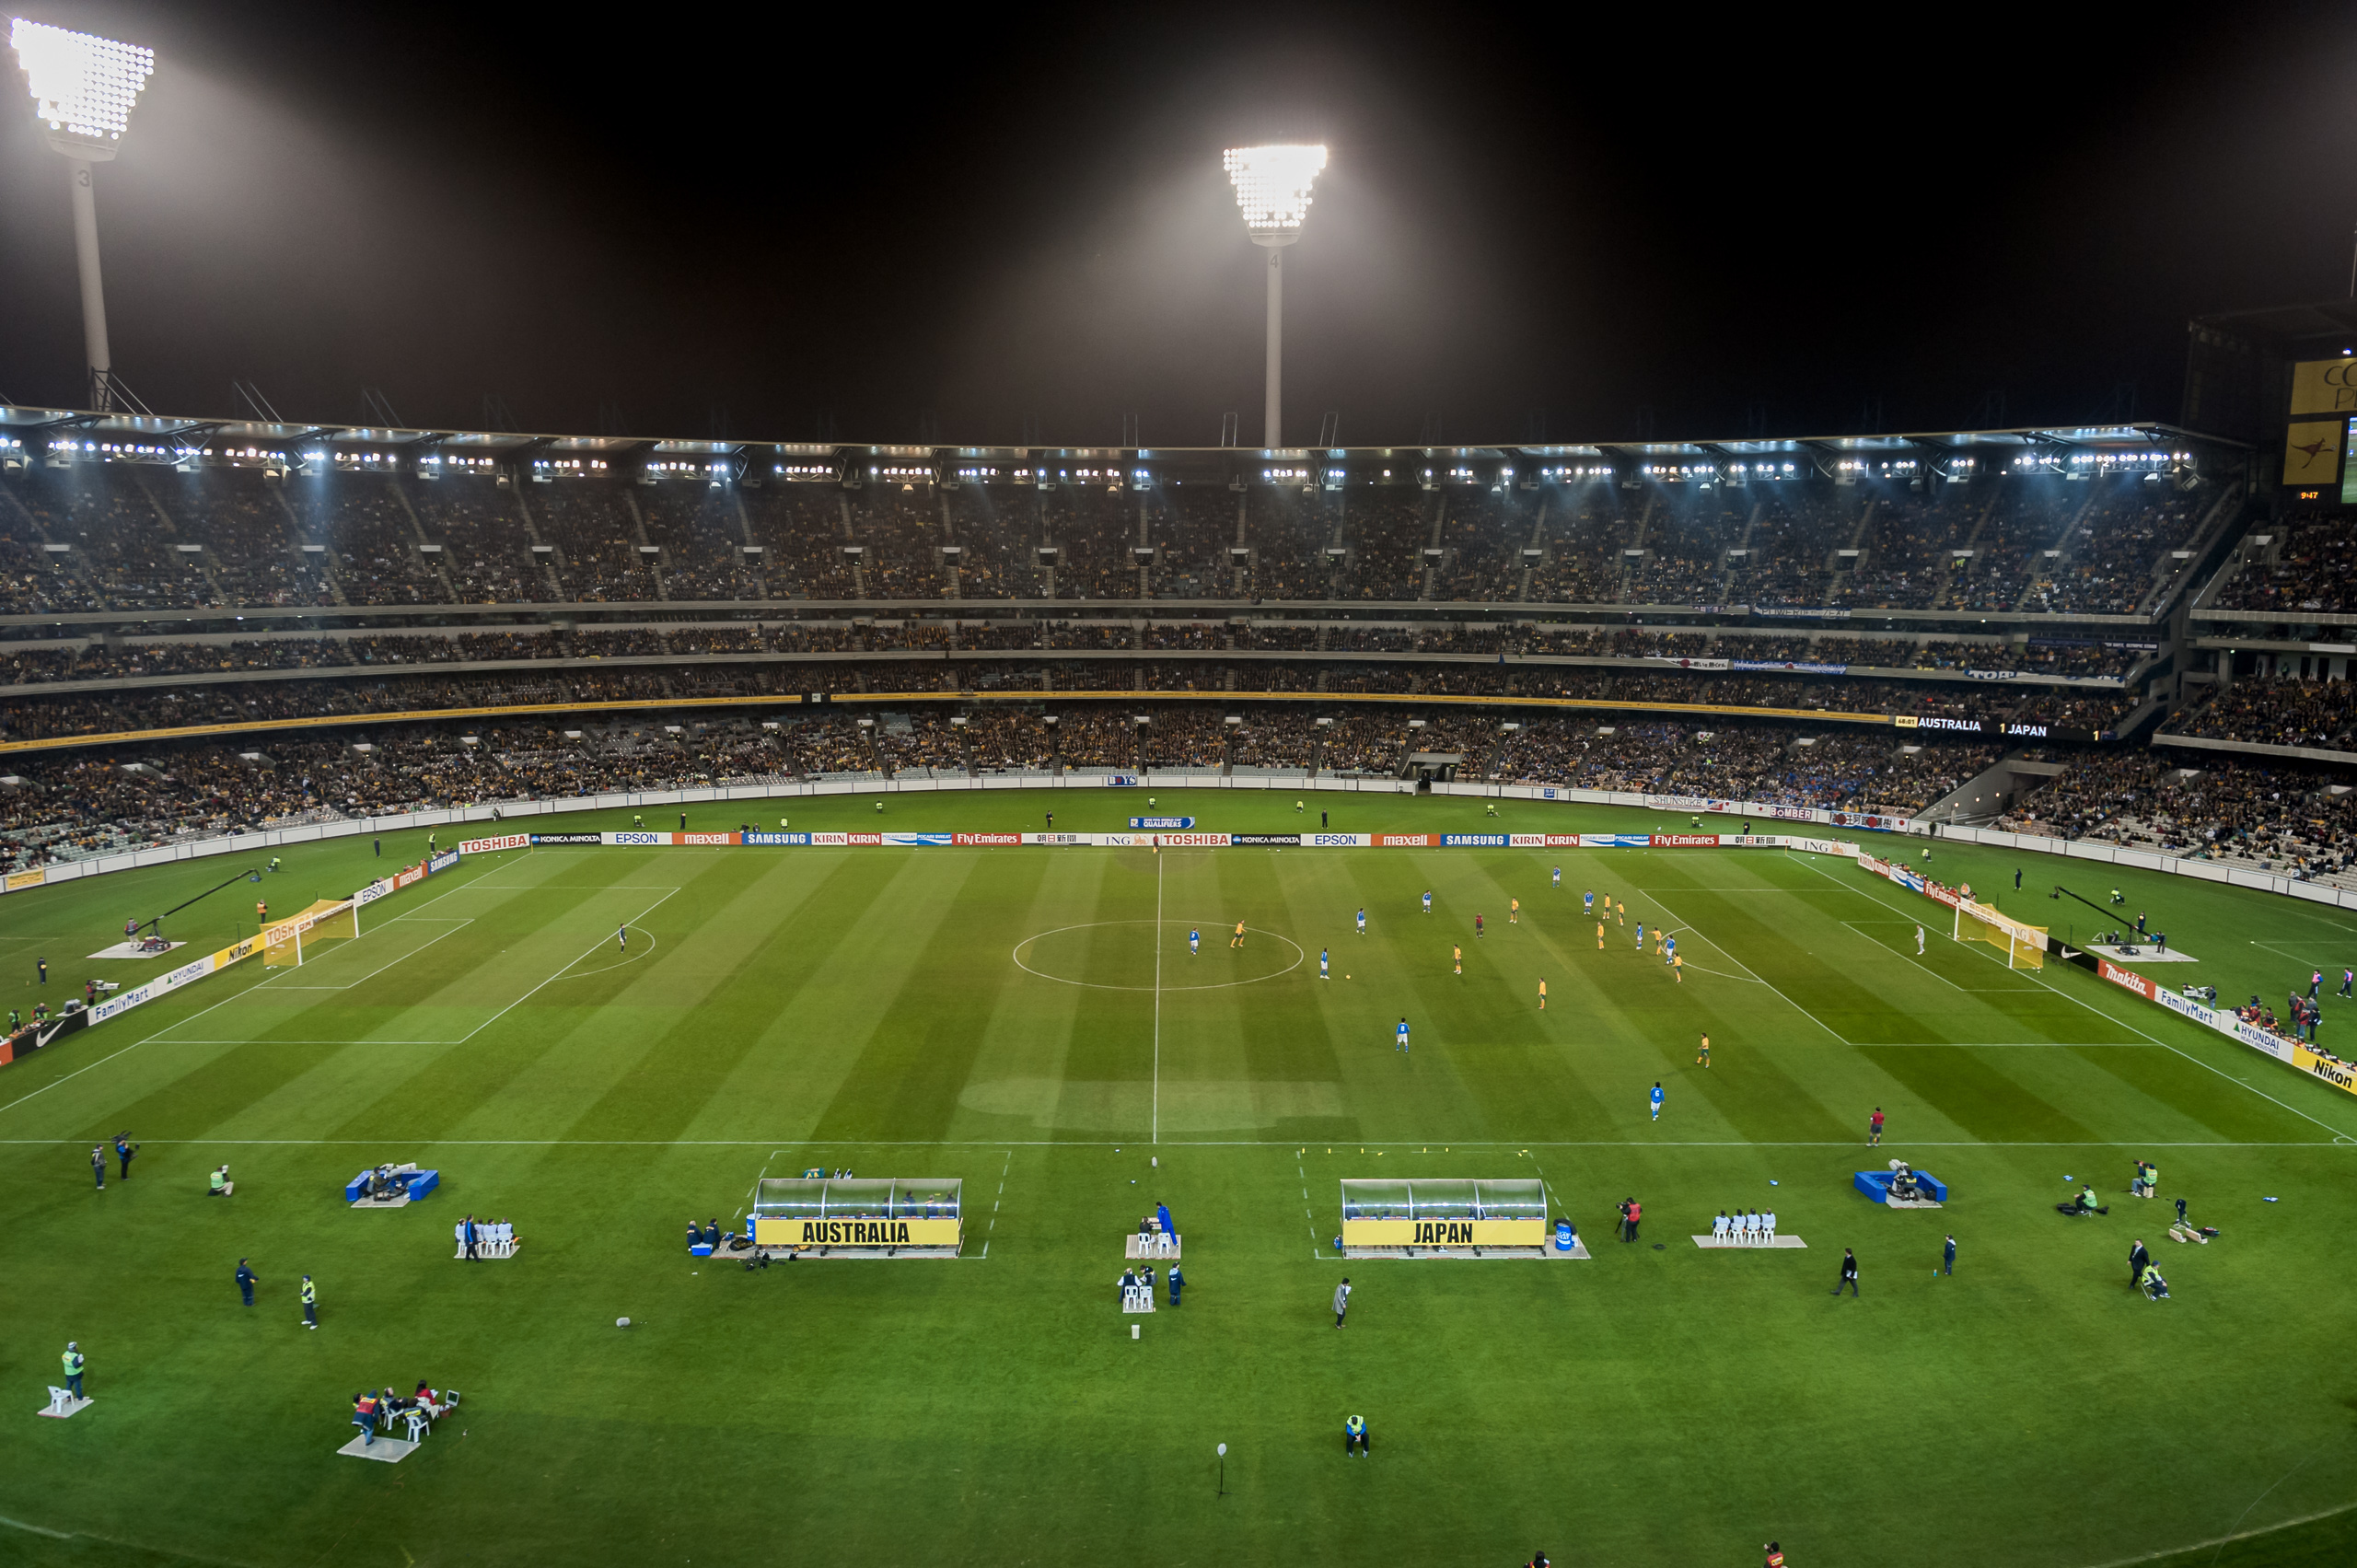 MELBOURNE, 17 JUNE 2009 - A view of the Melbourne Cricket Ground during an Asia group 1 qualification match for the FIFA 2010 World Cup between Australia and Japan in Melbourne, Australia.